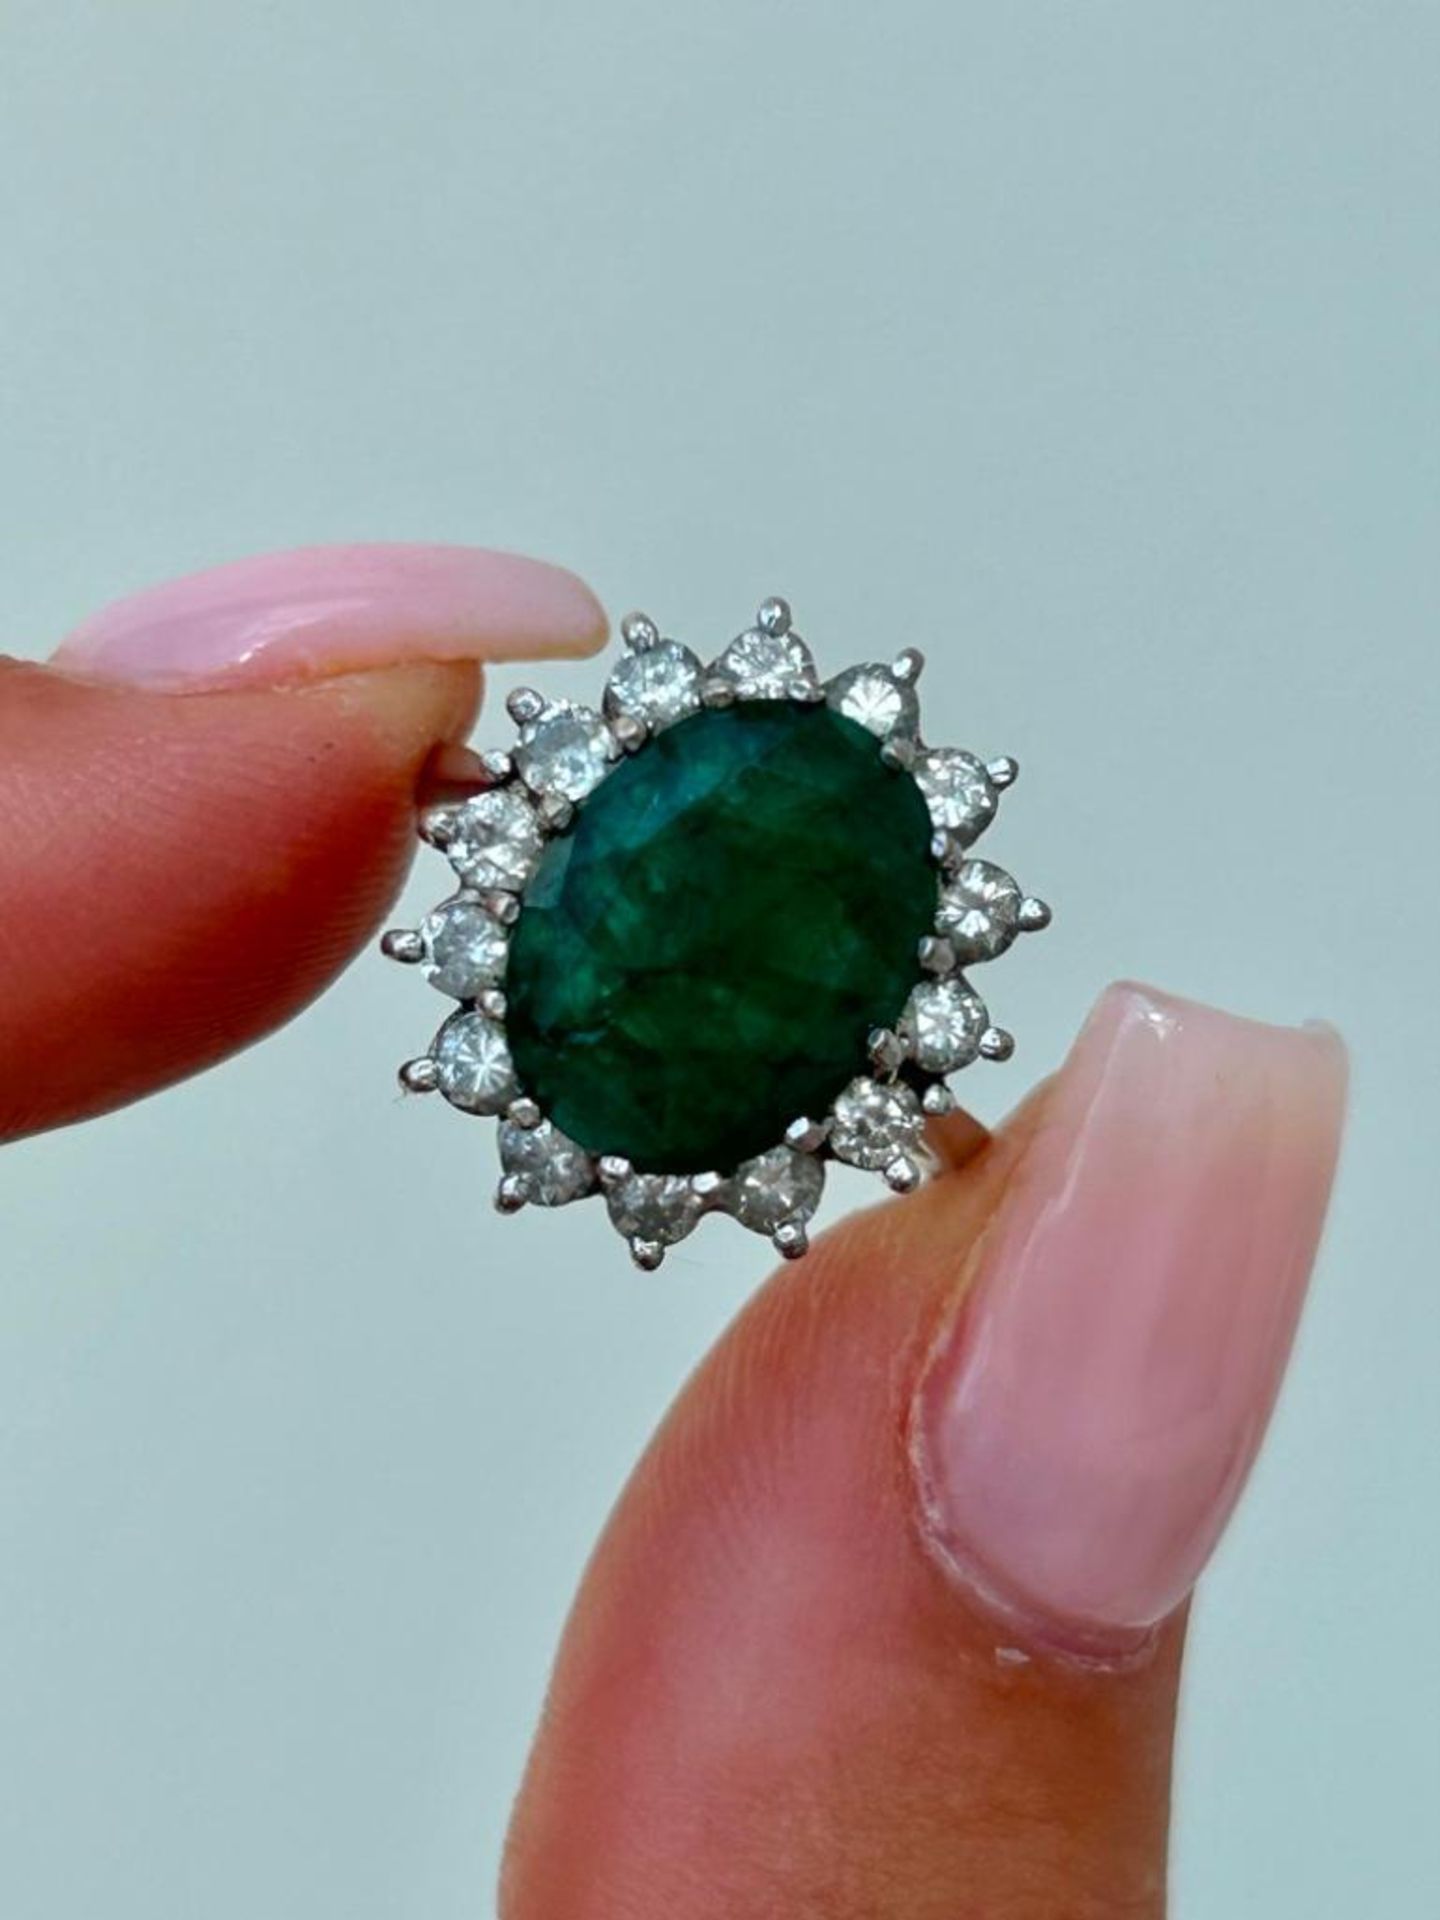 Large Emerald and Diamond Cluster Ring in 18ct Gold Diamond Approx 1 Carat Emerald Approx 6 Carat